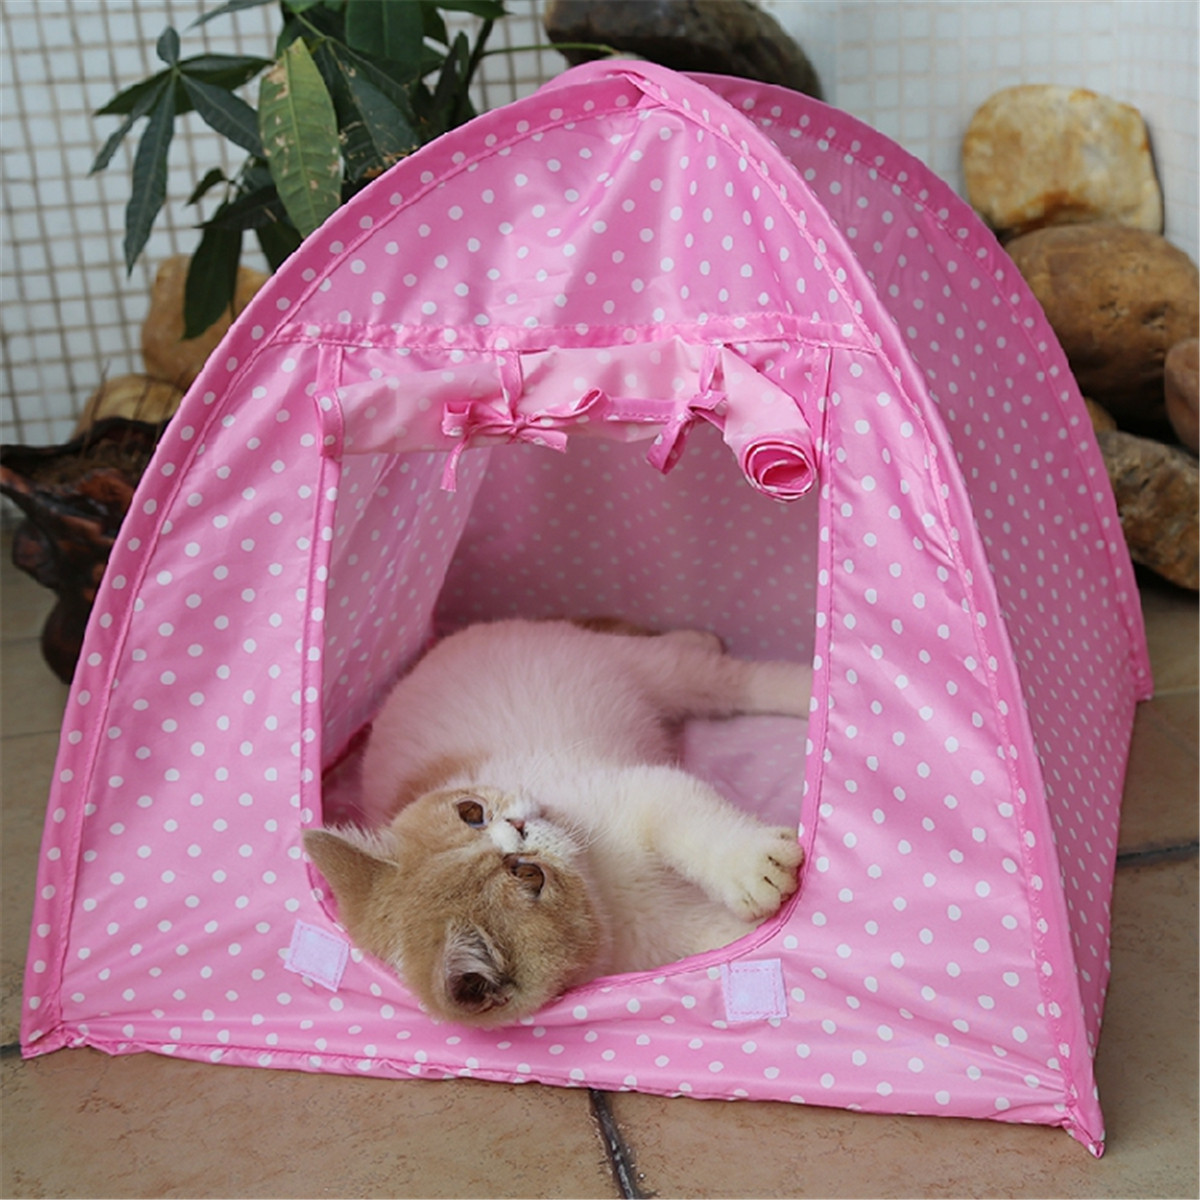 Foldable-Pet-Cat-Tent-Playing-Bed-House-Kitty-Camp-Waterproof-Outdoor-Dog-Kennel-1127104